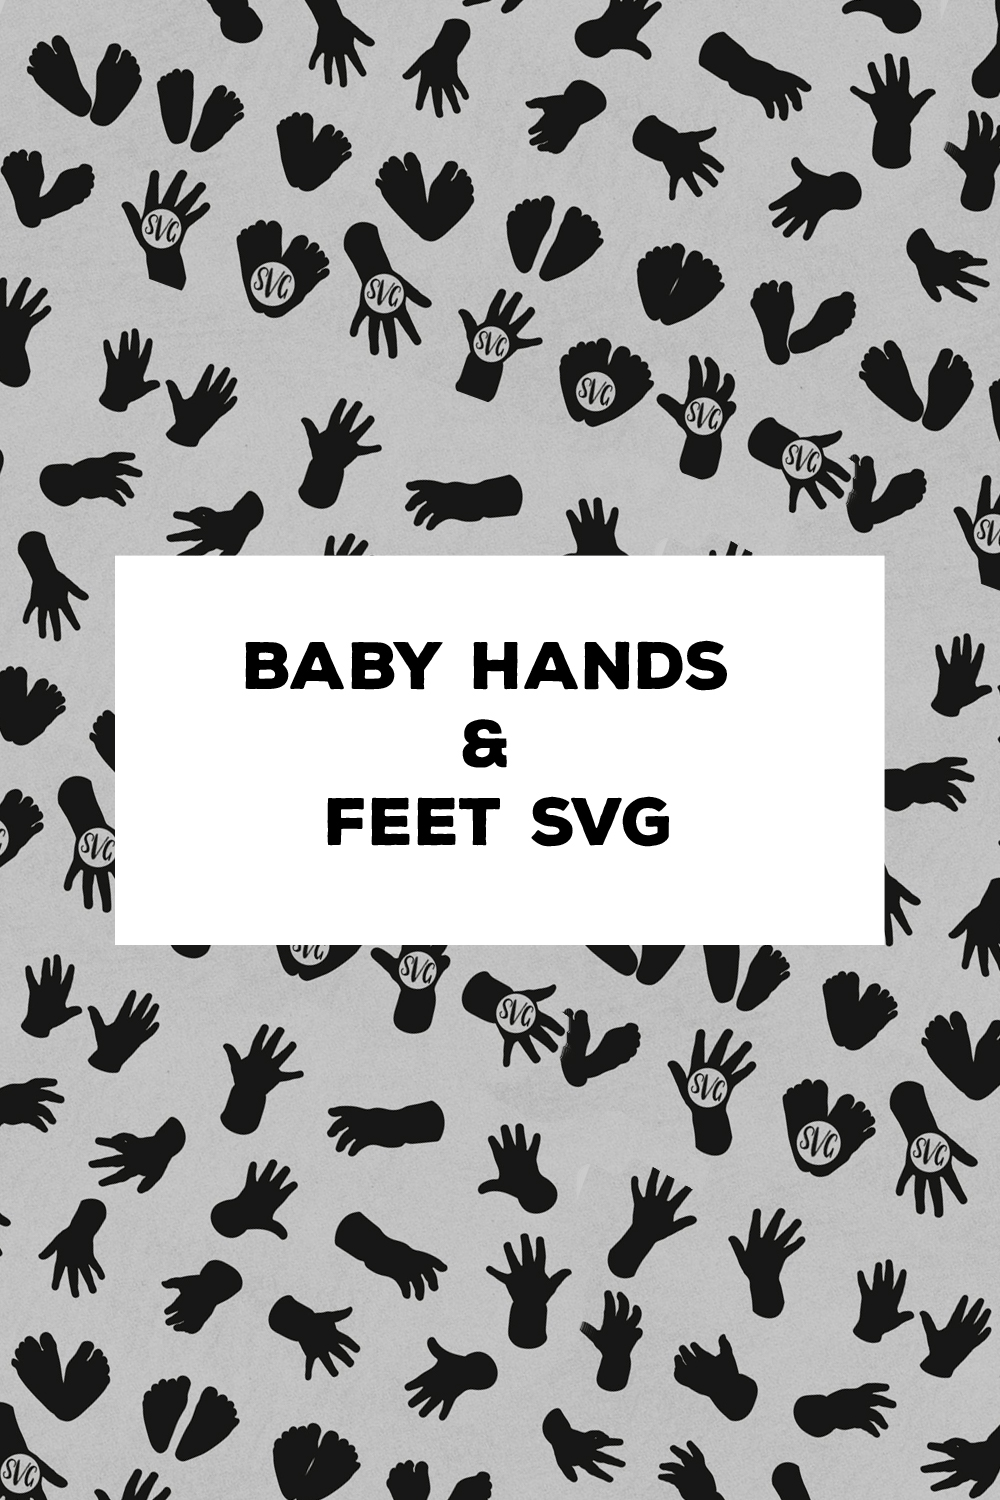 Images of hands and feet of children.